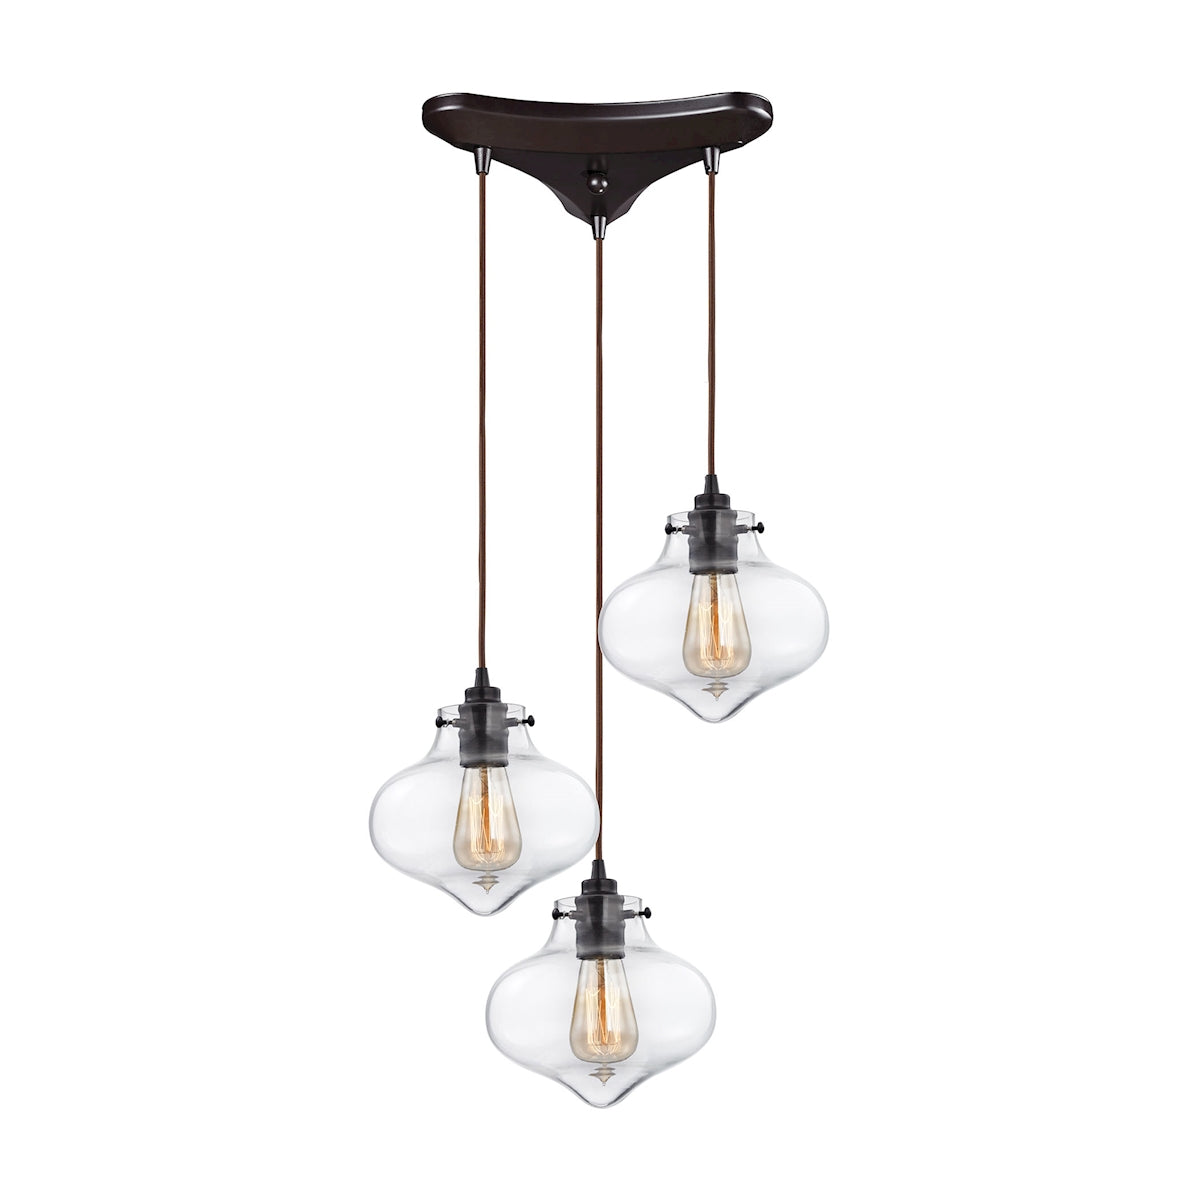 ELK Lighting 31954/3 Kelsey 3-Light Triangular Pendant Fixture in Oil Rubbed Bronze with Clear Glass